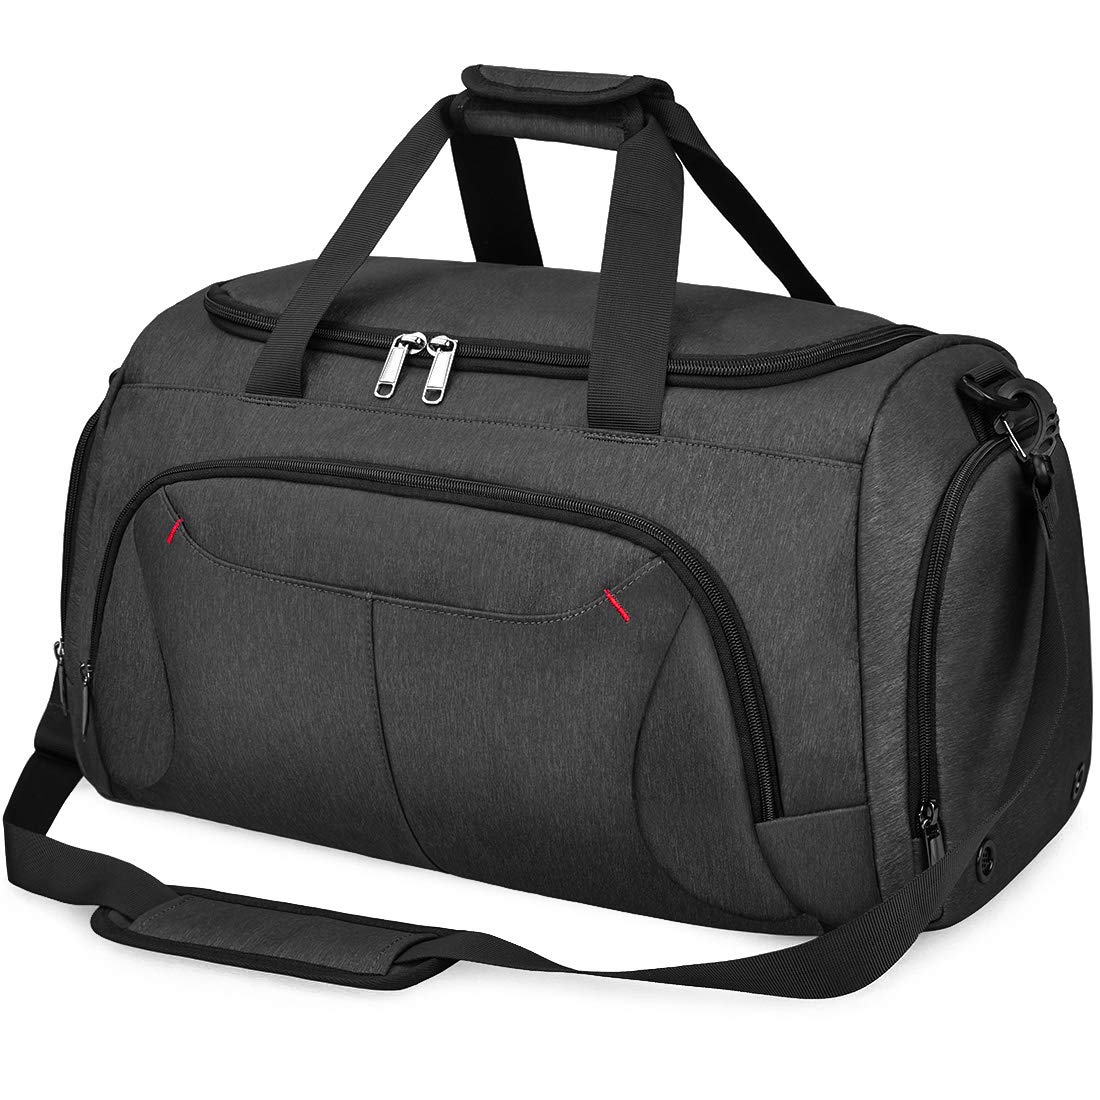 Gym Bag Colorful Travel Duffel Bag Large Lightweight Sports Duffel Bags,  Swimming Bag, Gym Bag with Waterproof Shoe Compartment, Weekend Travel Bag  with a Water-resistant Insulated Pocket price in UAE | Amazon